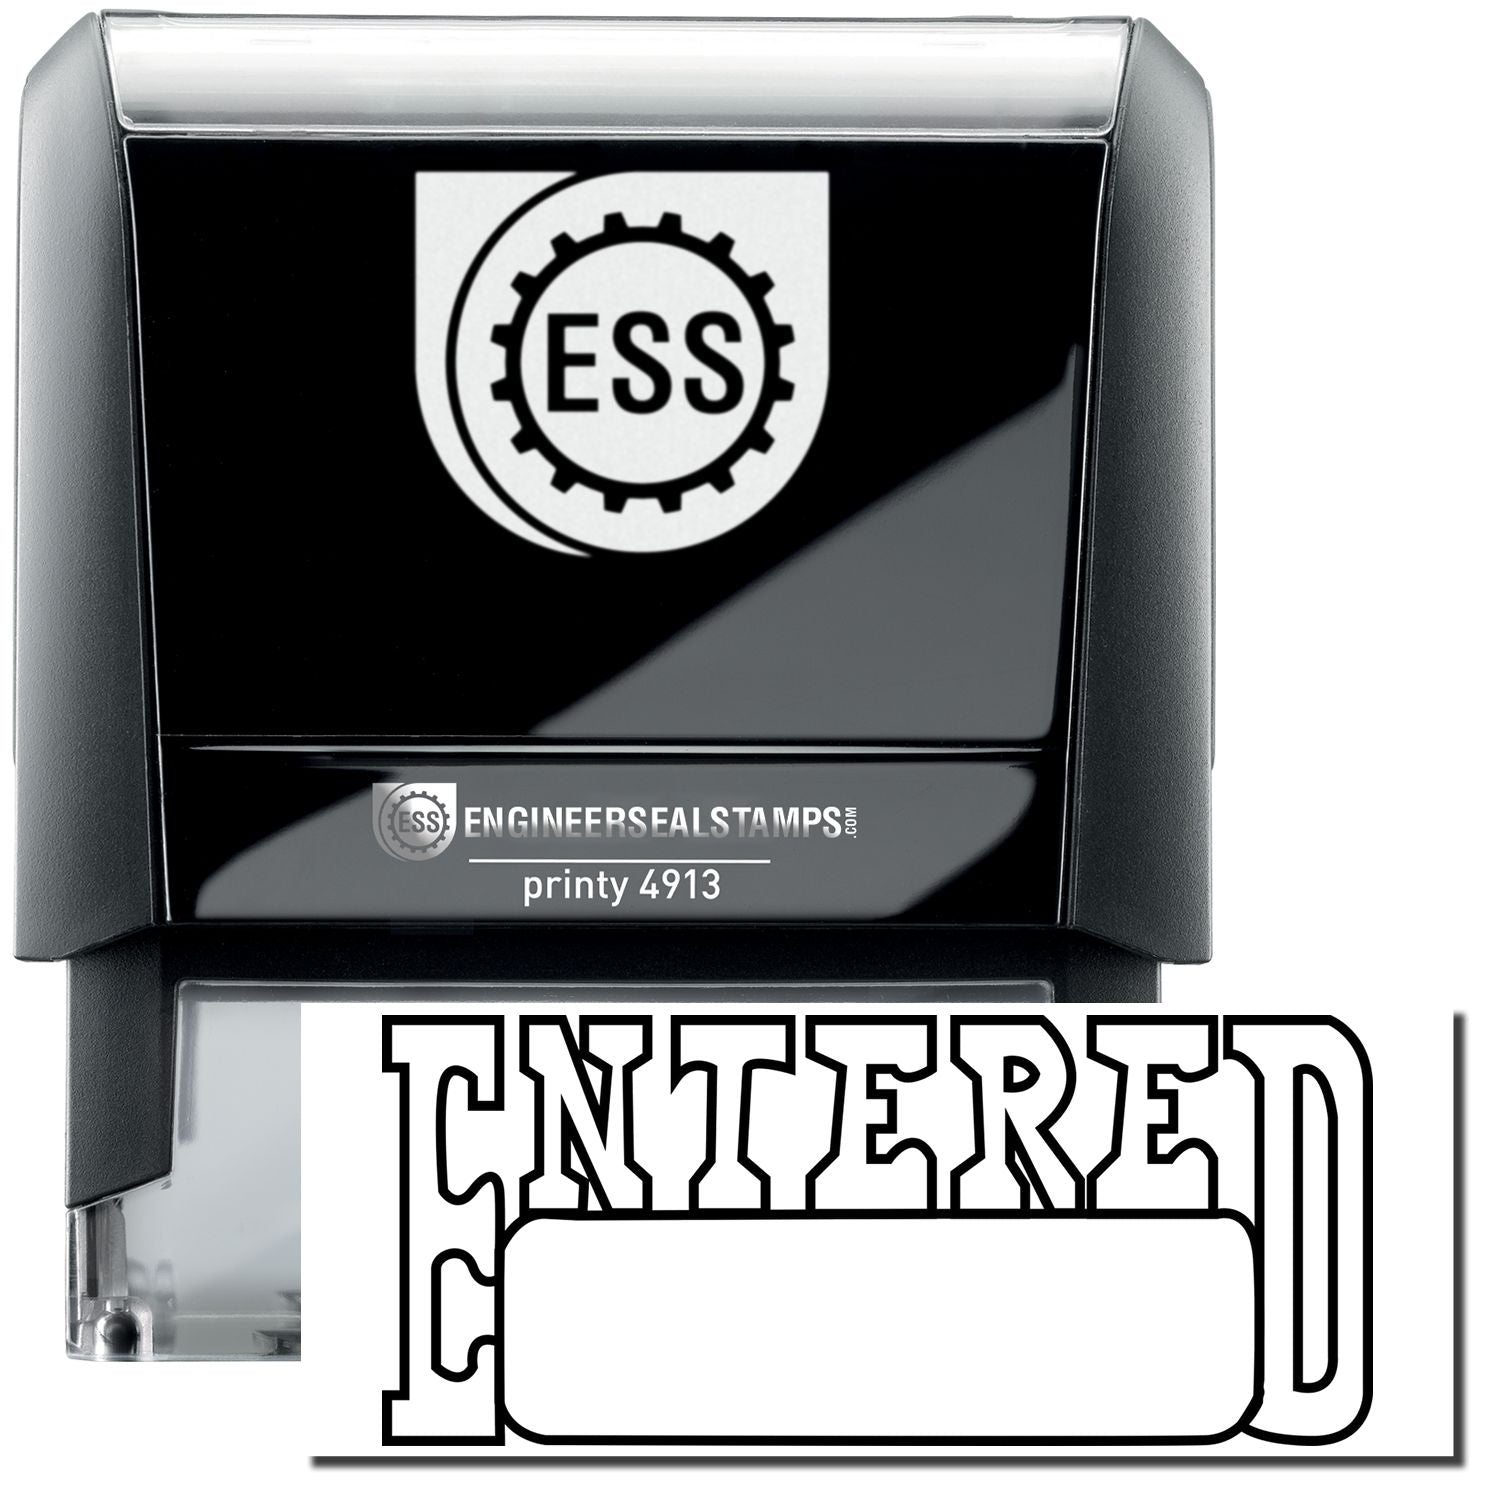 A self-inking stamp with a stamped image showing how the text "ENTERED" in a large outline font with a date box is displayed by it after stamping.